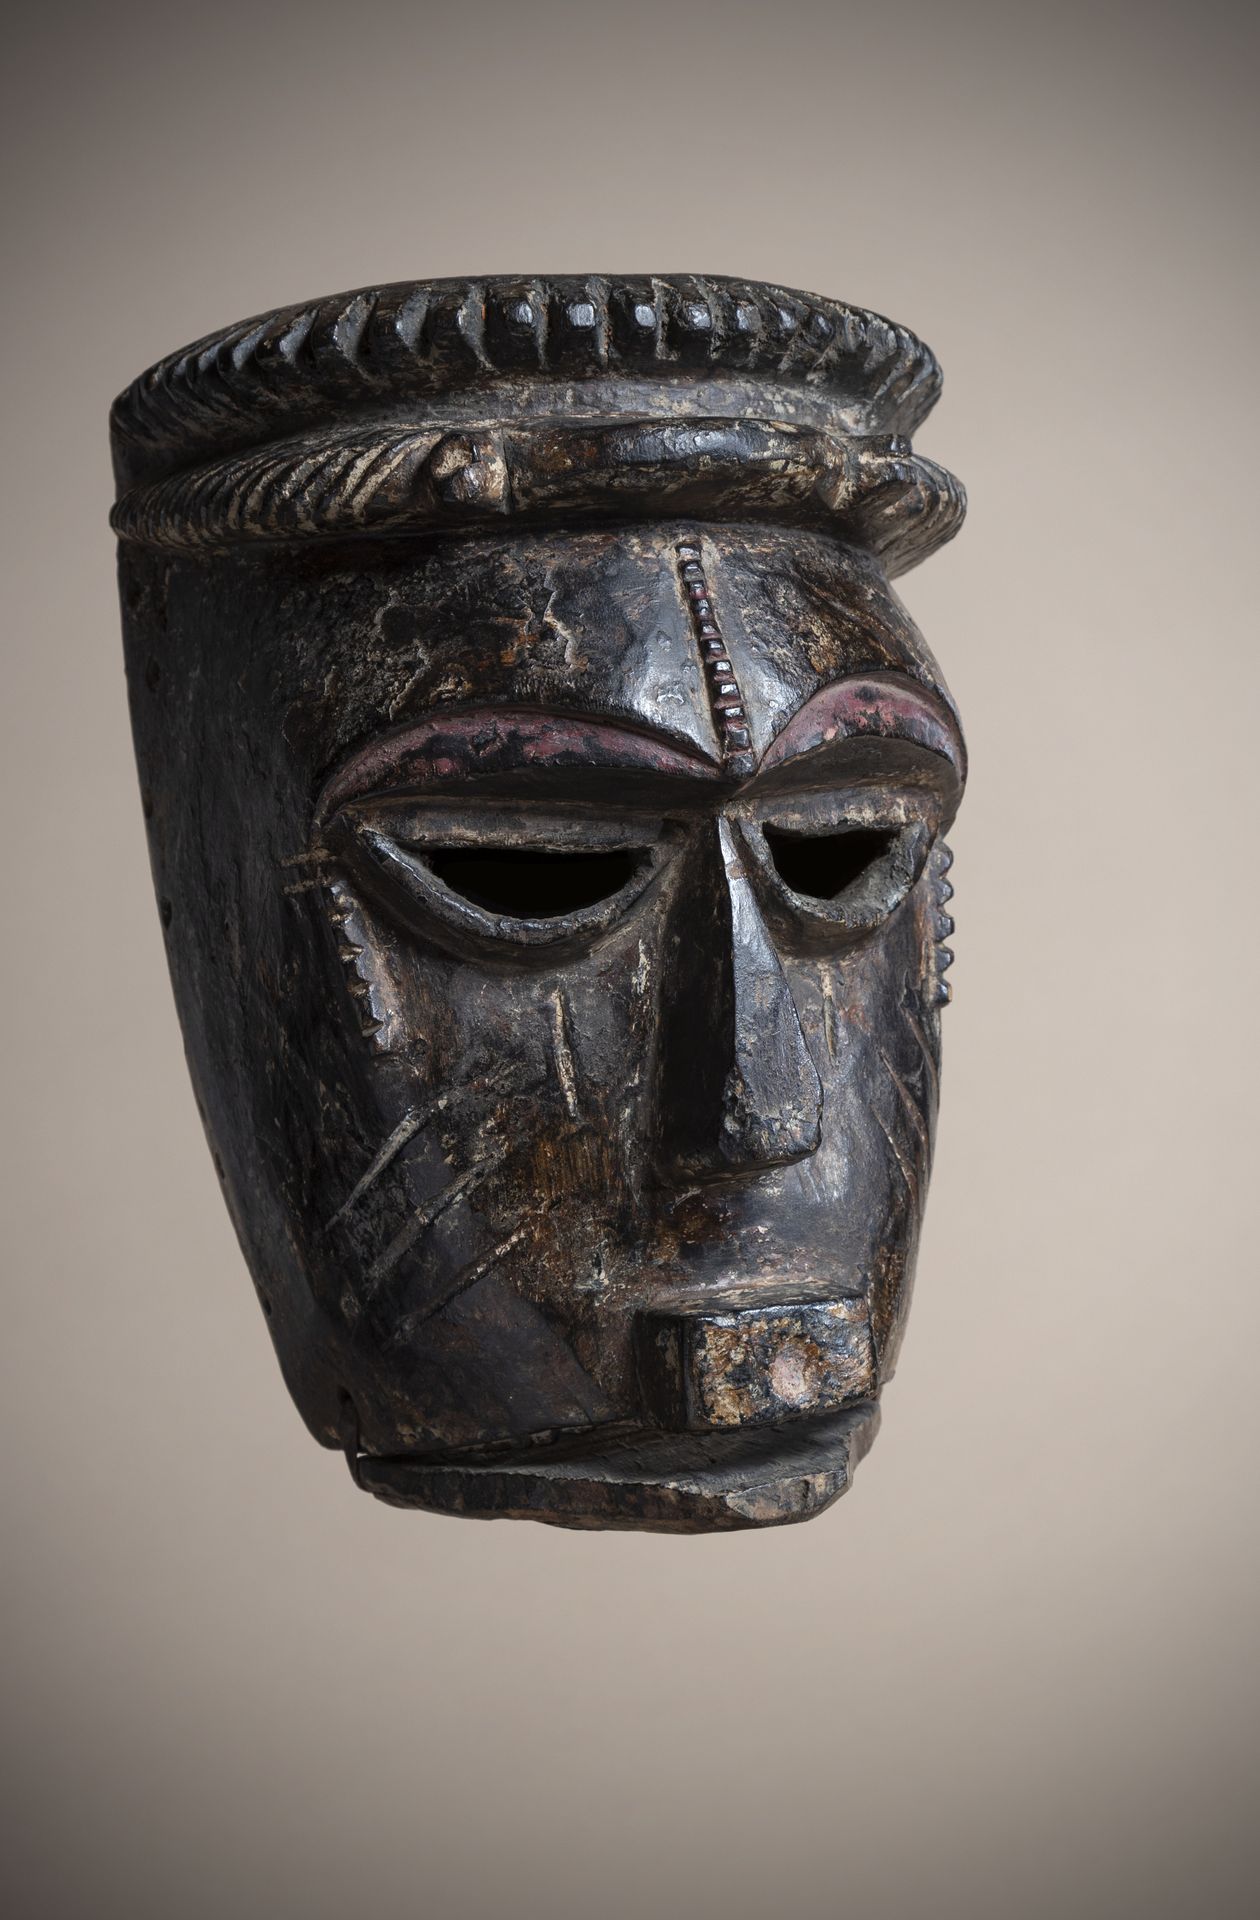 Null IBIBIO (Nigeria)

Mask with a deep dark brown patina, mobile jaw wearing a &hellip;